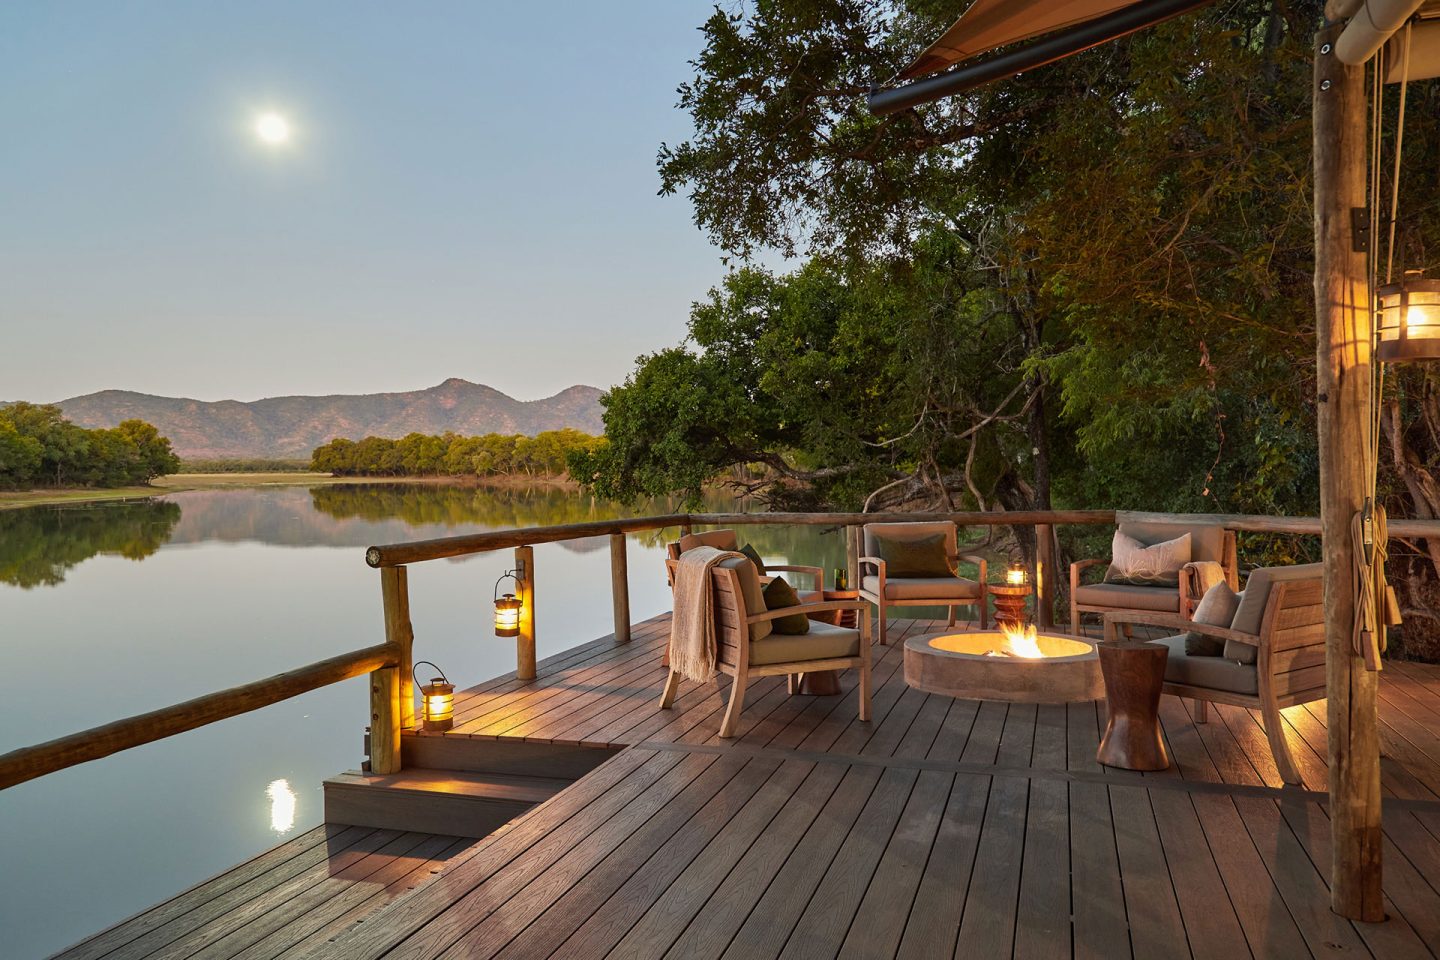 Zambia has a fantastic number of small, privately owned camps, each with their own charming character. It is usual to combine a few camps together or have a night under the stars! Credit: The Bushcamp Company